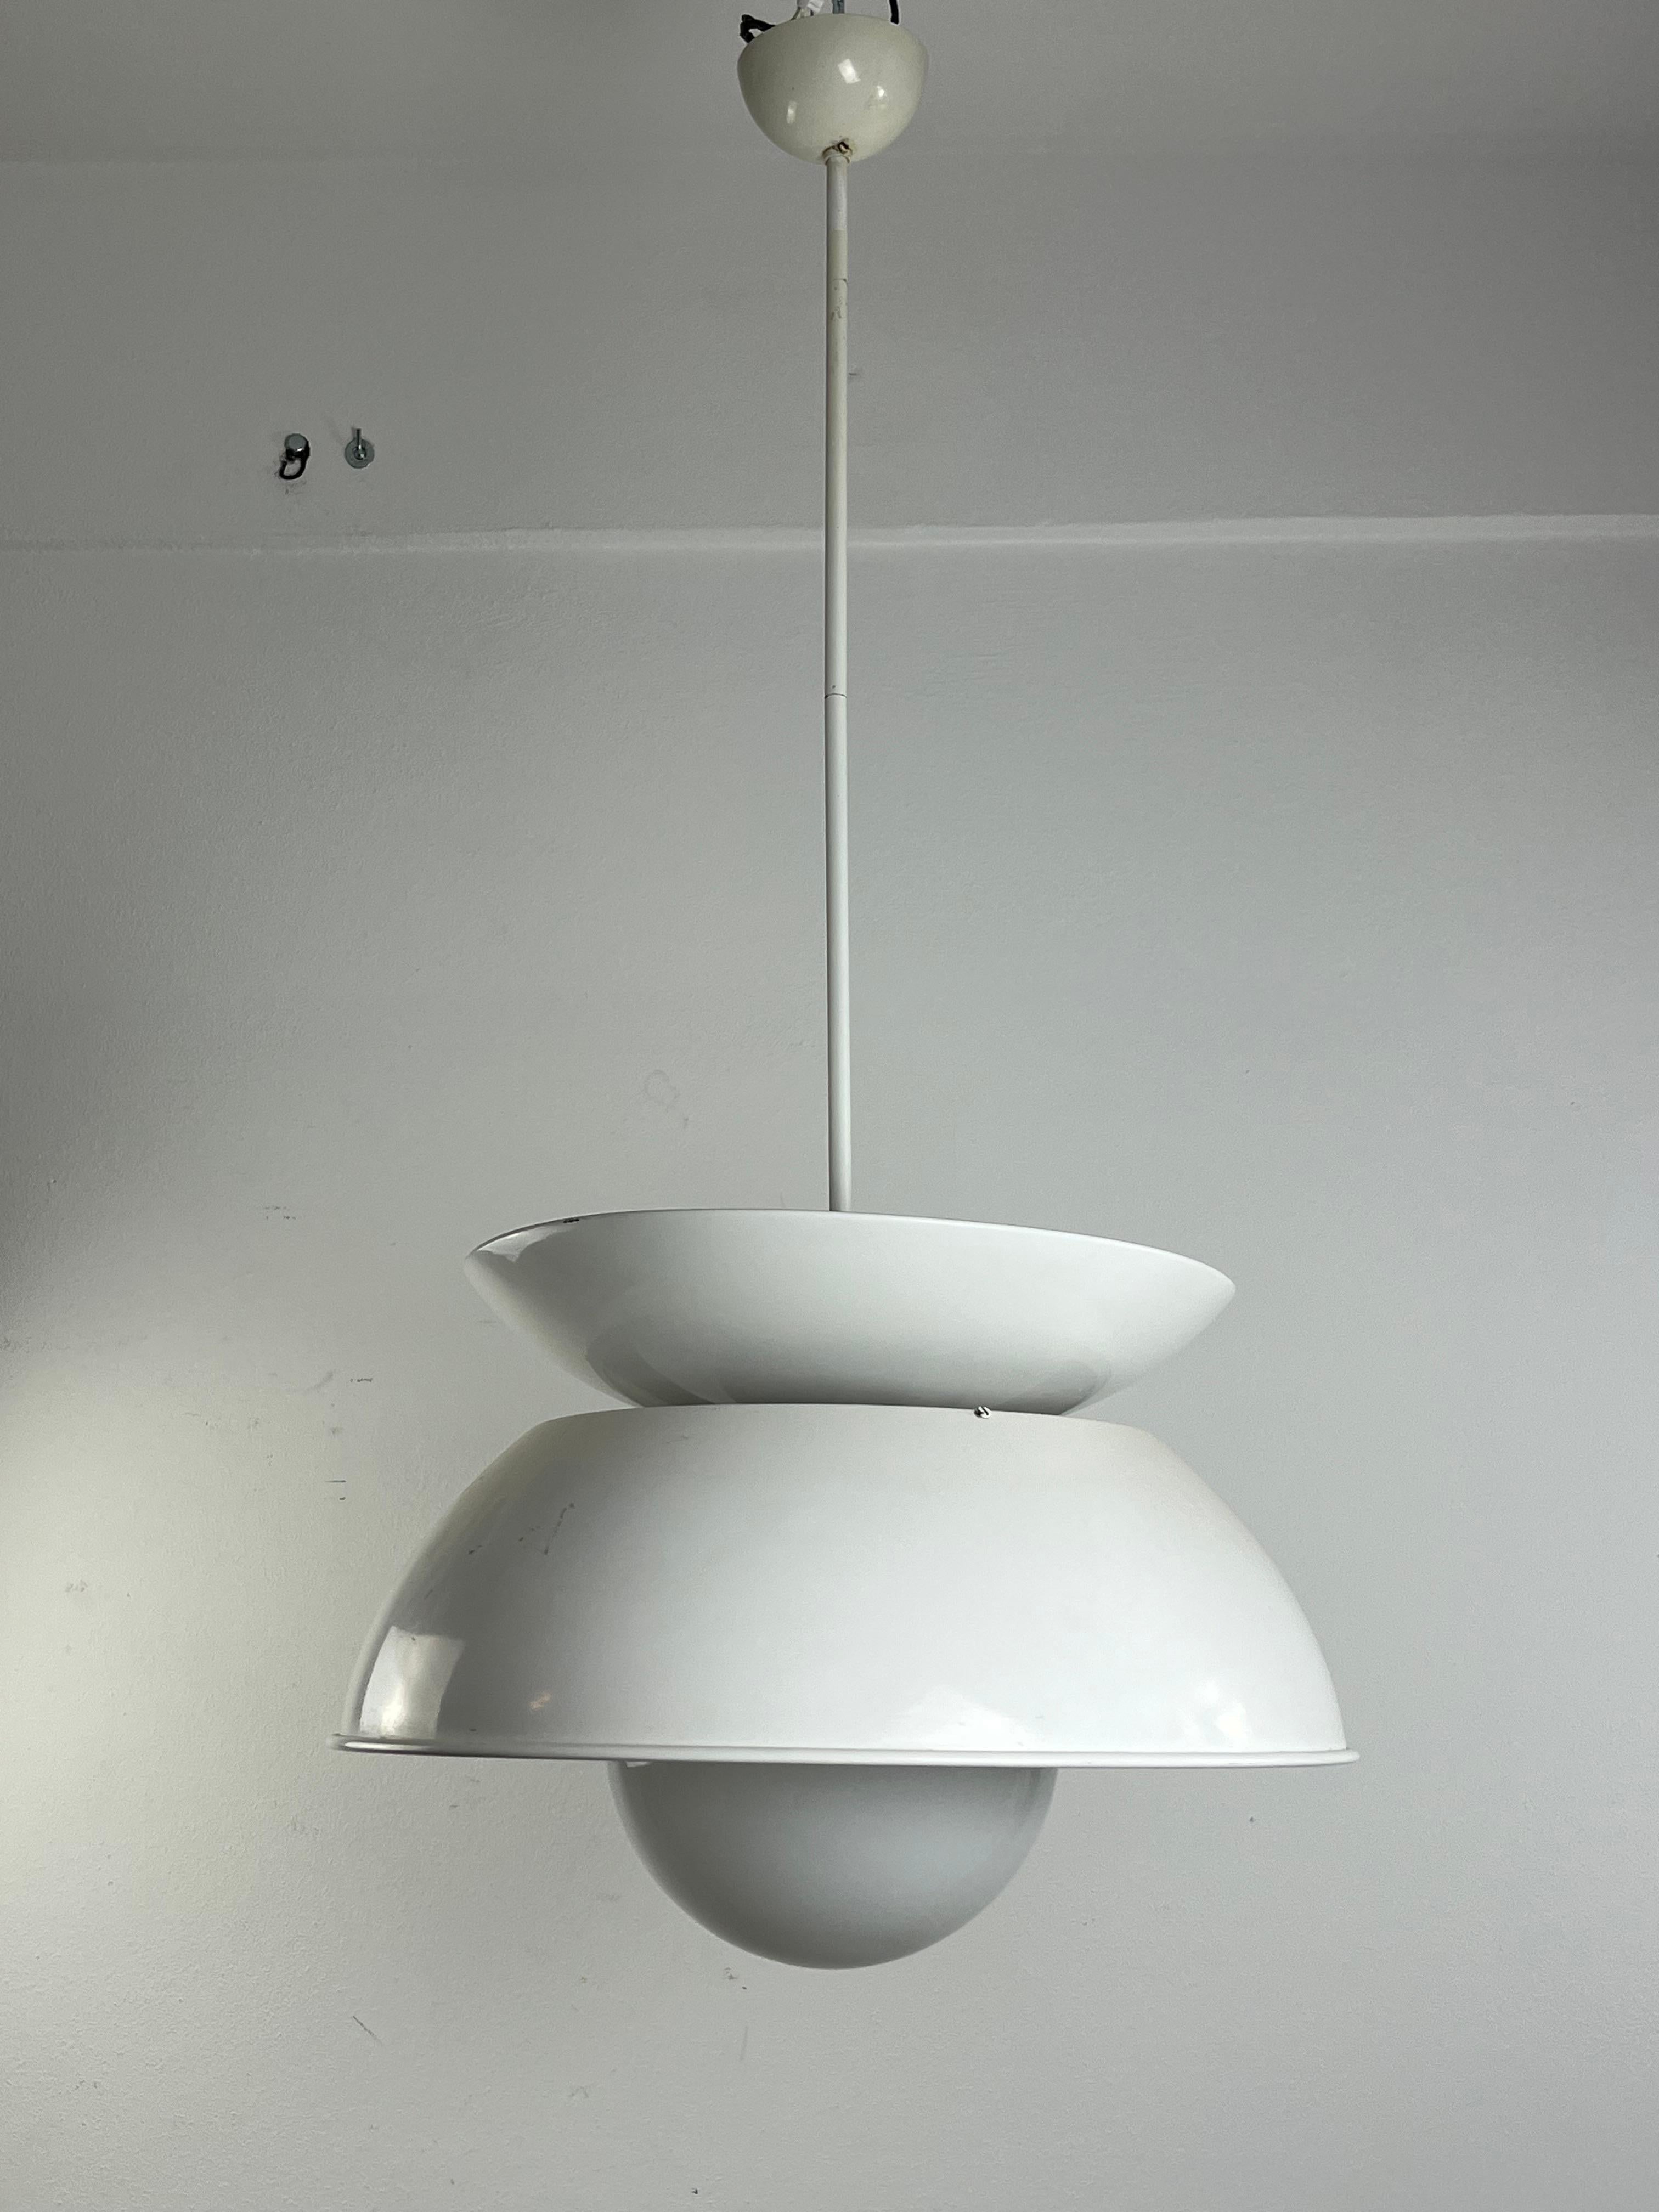 Metal Mid-Century Cetra Model Chandelier Attributed To Vico Magistretti for Artemide For Sale